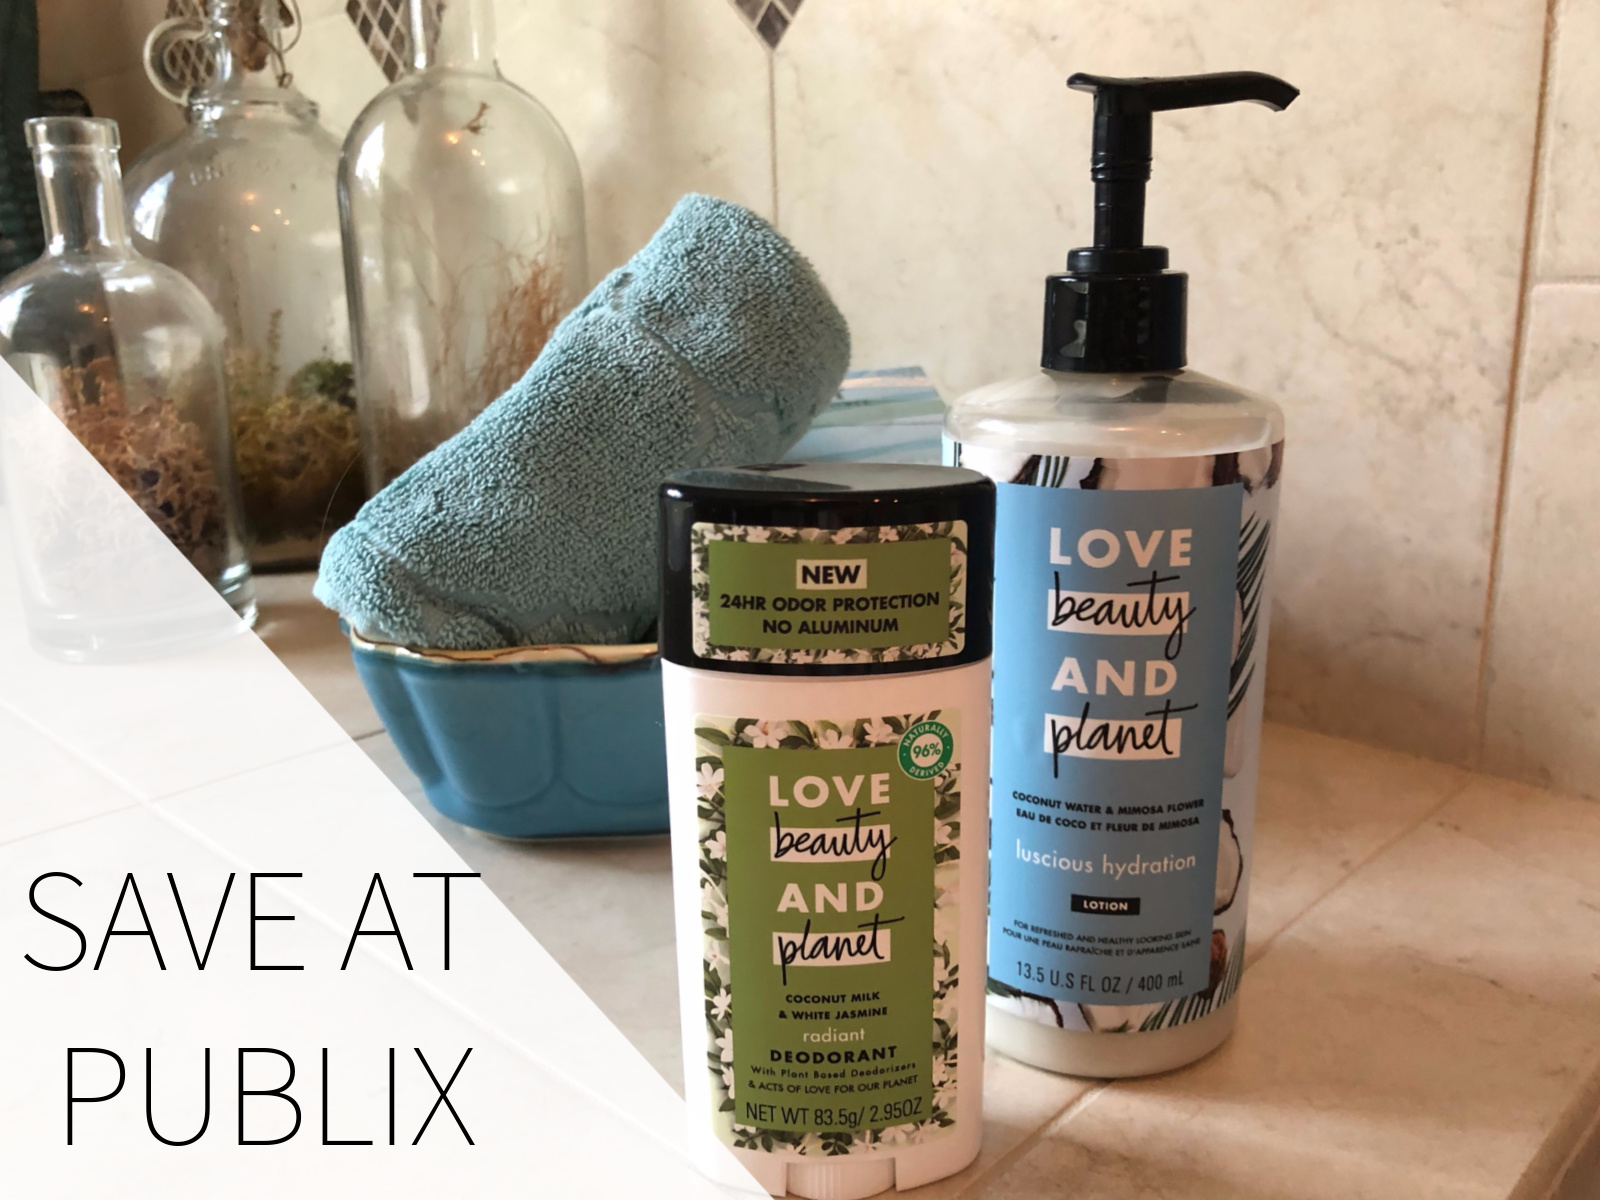 Fantastic Savings On Your Favorite Unilever Personal Care Products At Publix - Why Not Try Something New & Save! on I Heart Publix